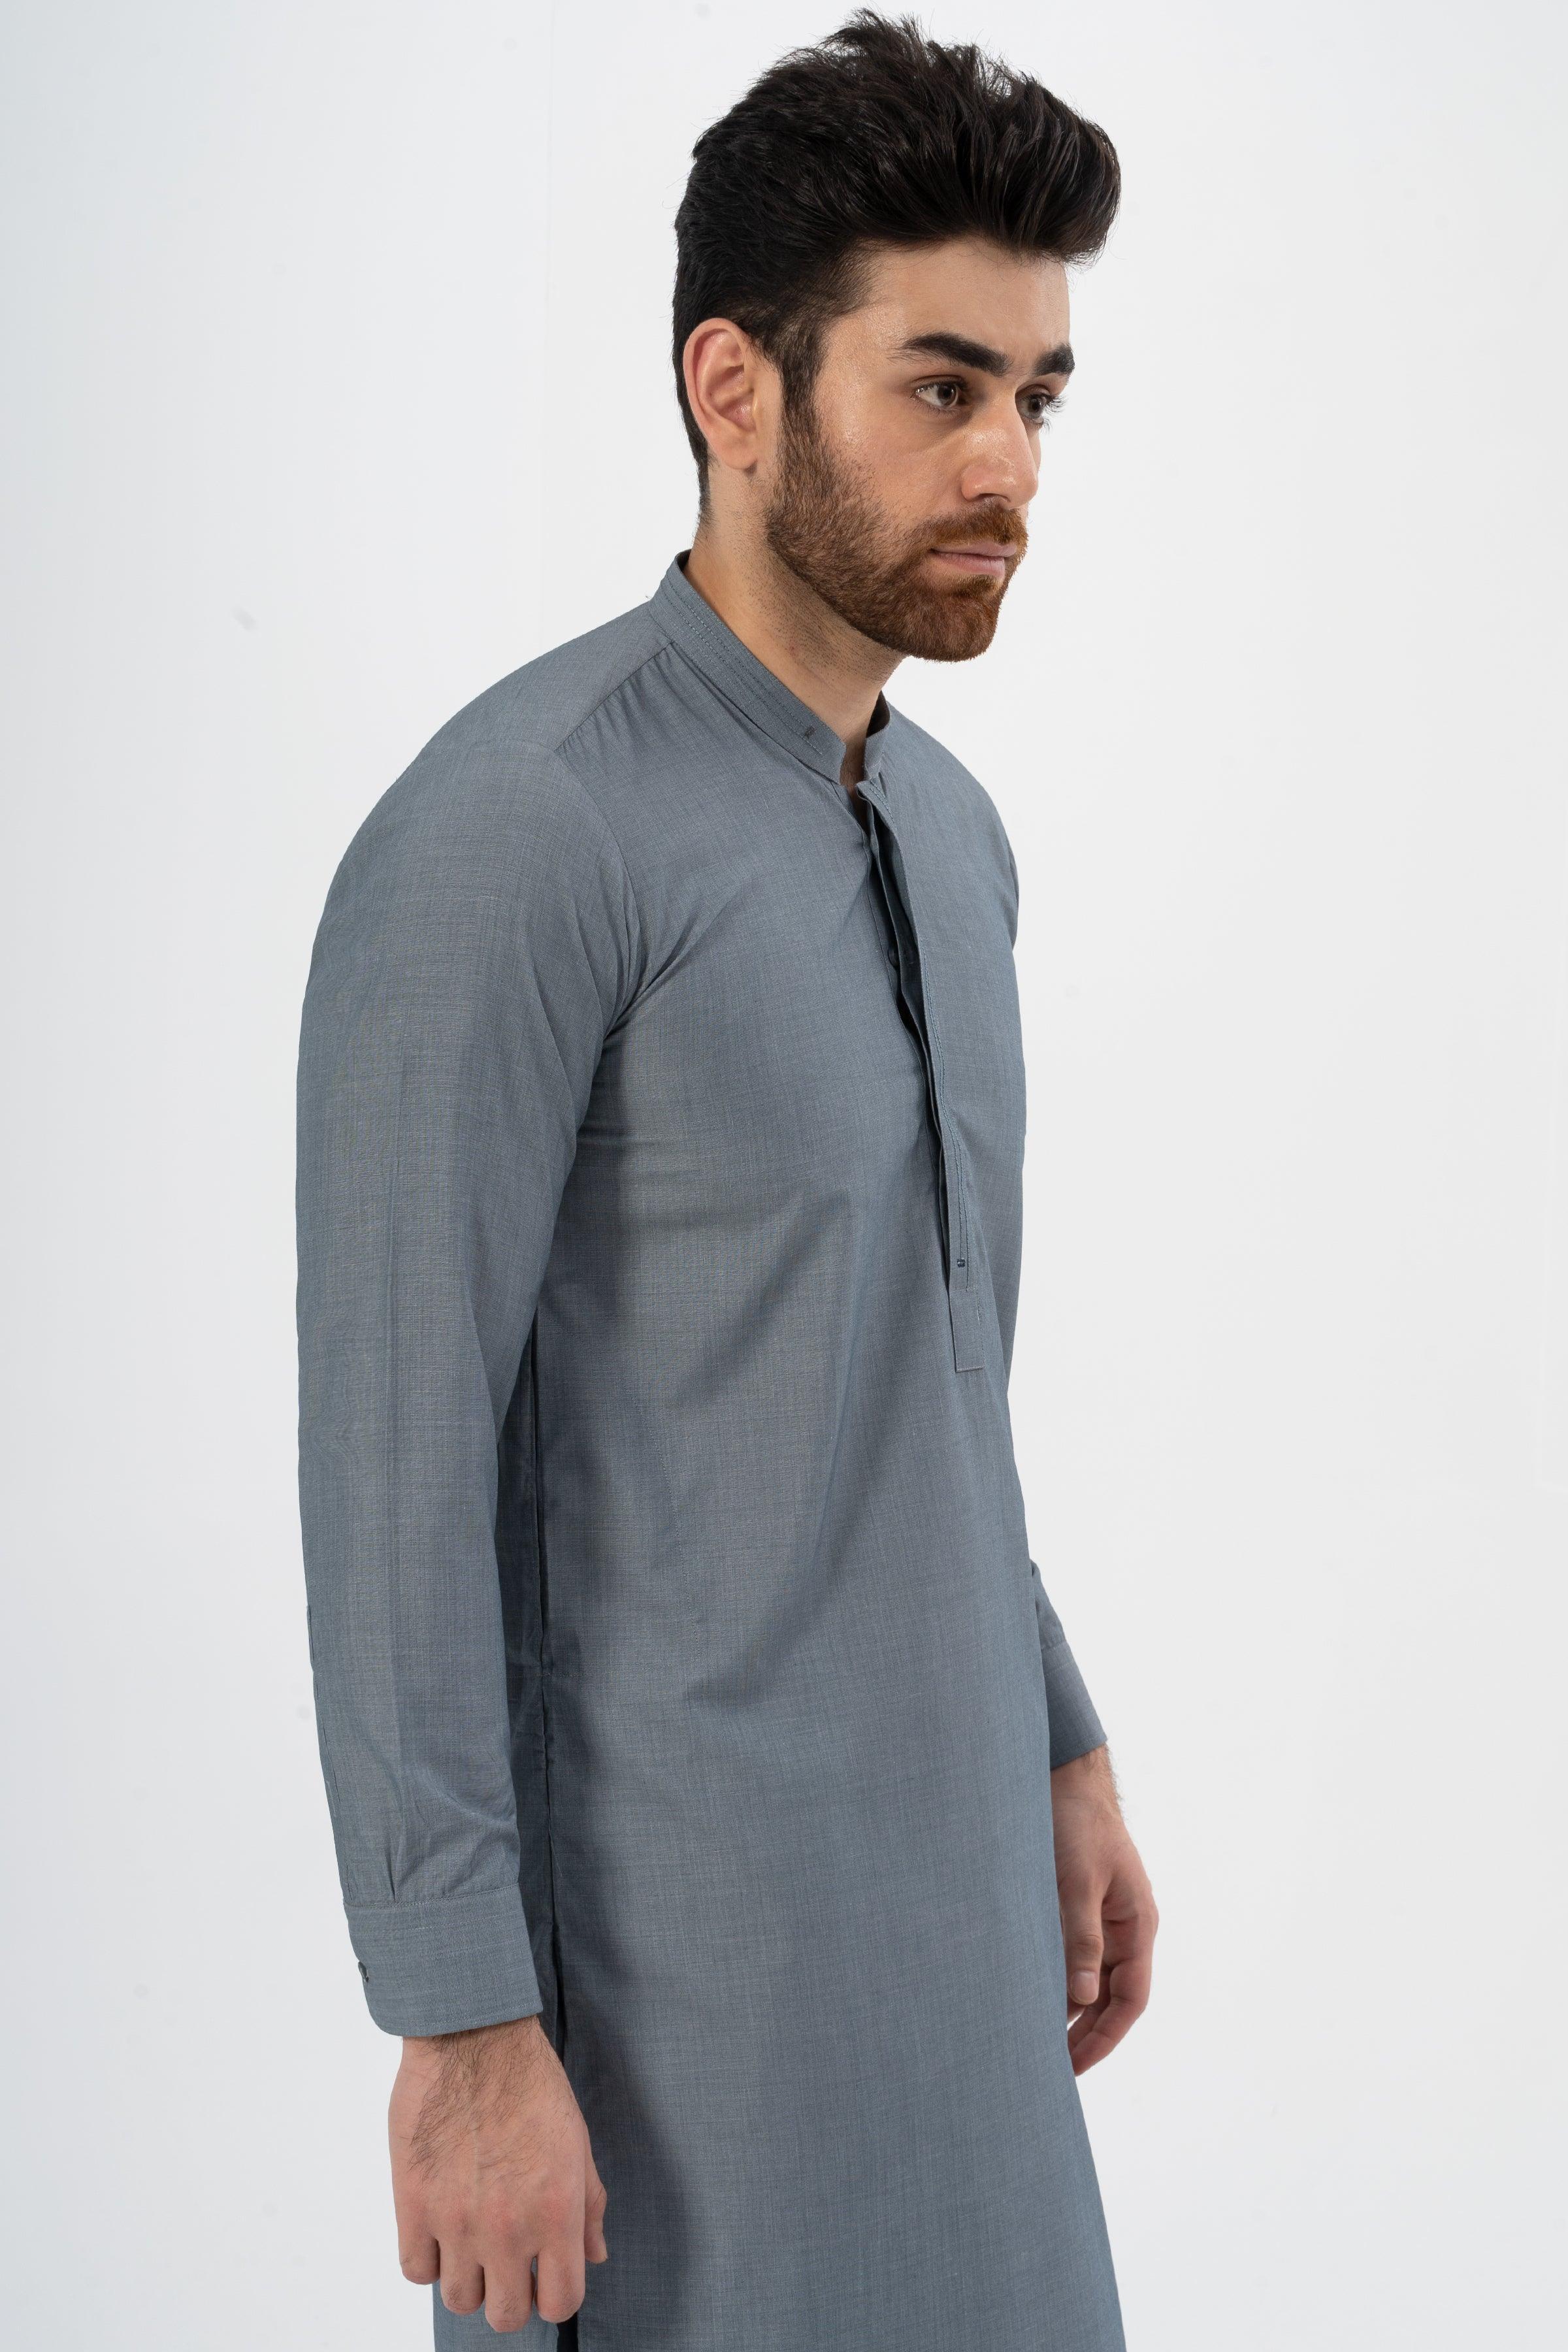 EXQUISITE TEXTURED SHALWAR KAMEEZ MID BLUE at Charcoal Clothing